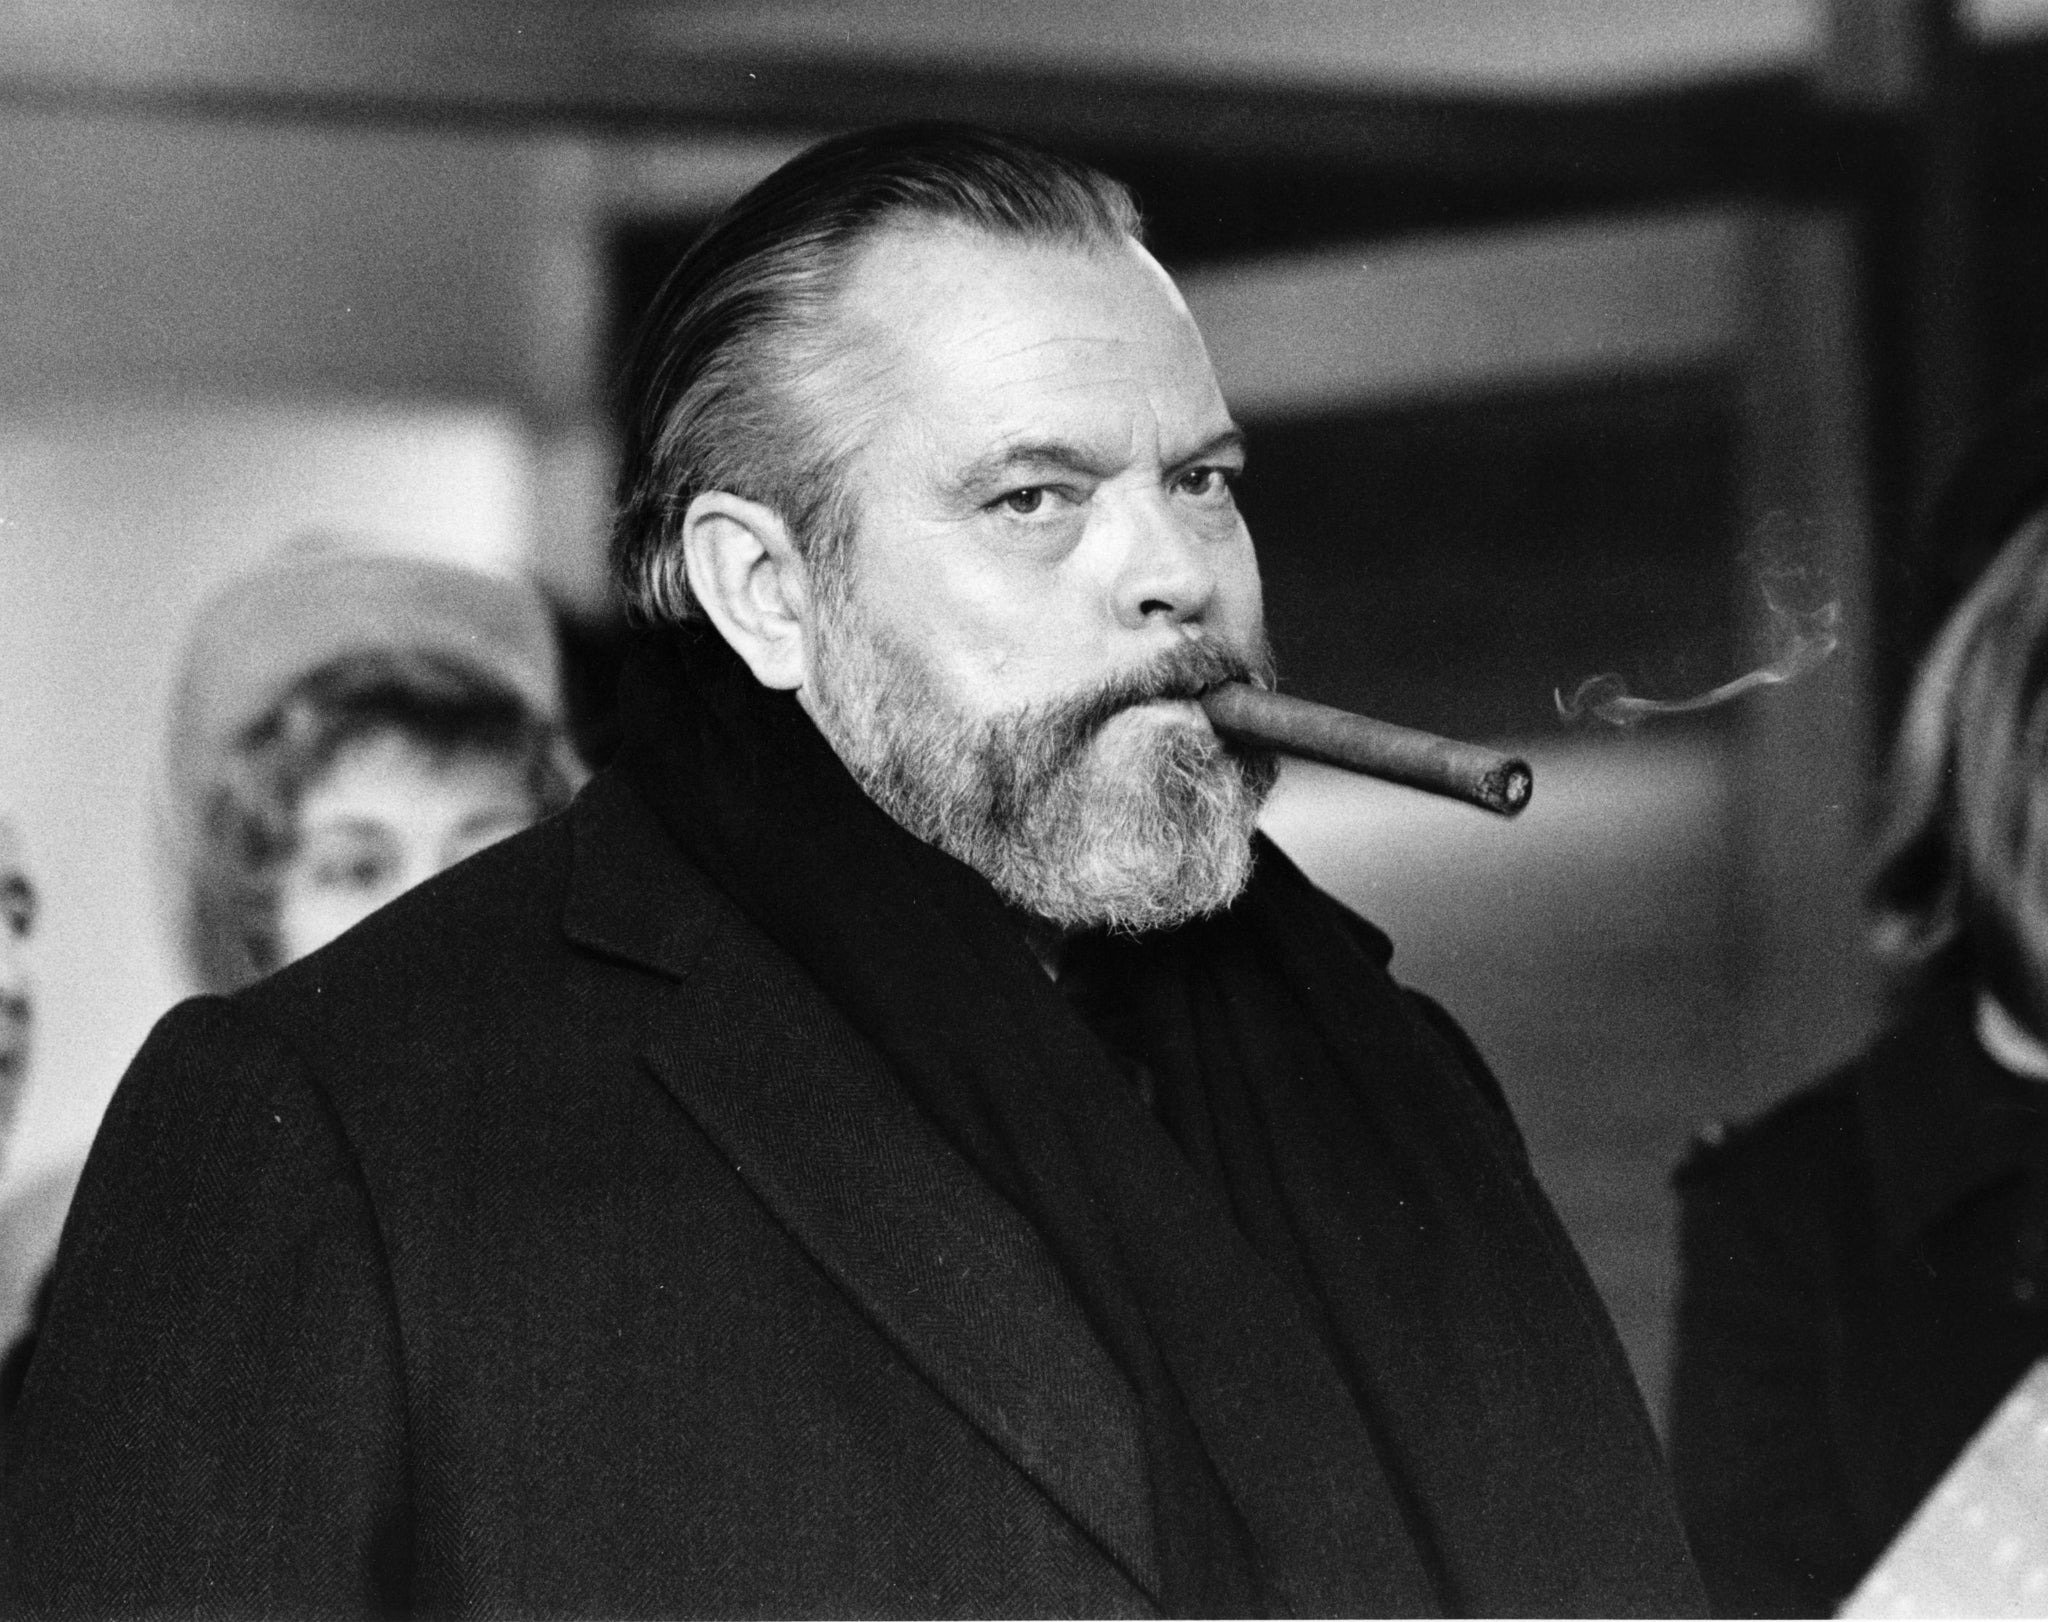 Screenwriter and director Orson Welles